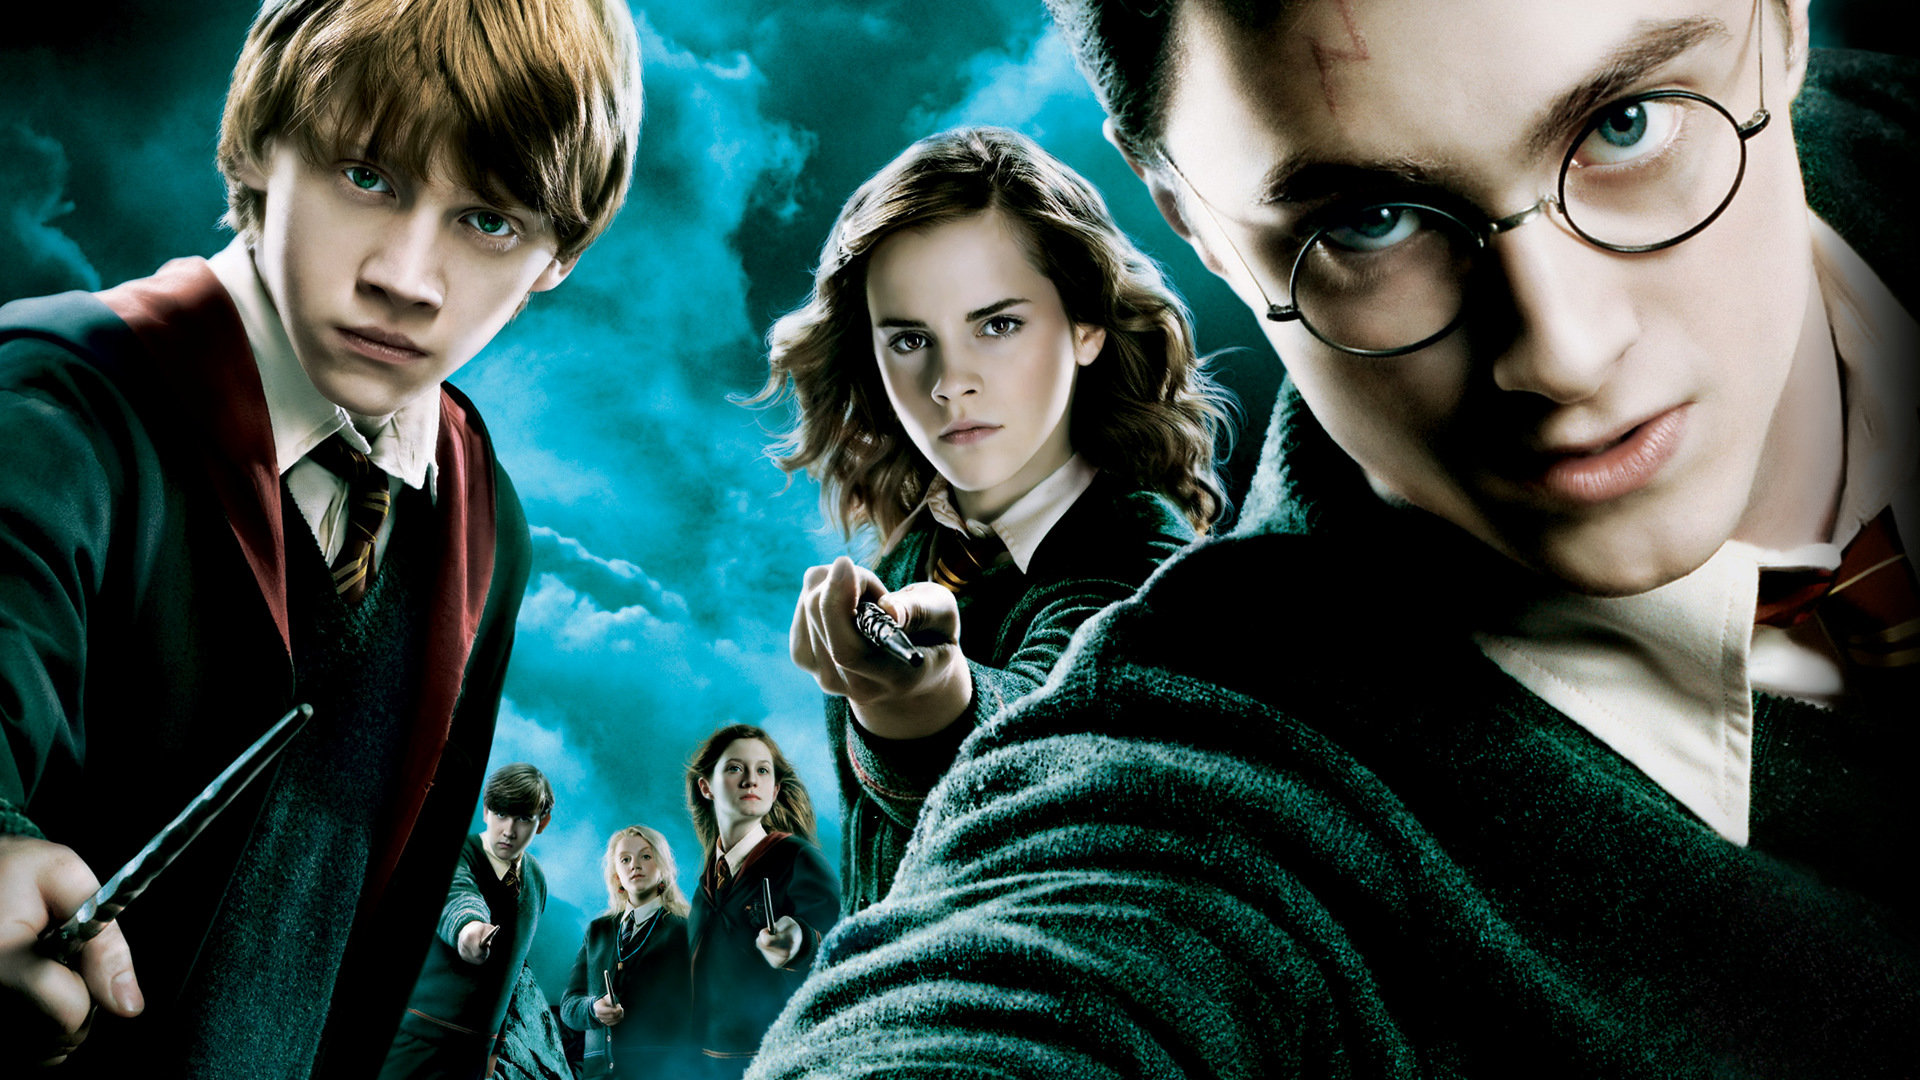 Download hd 1920x1080 Harry Potter And The Order Of The Phoenix PC wallpaper ID:139721 for free